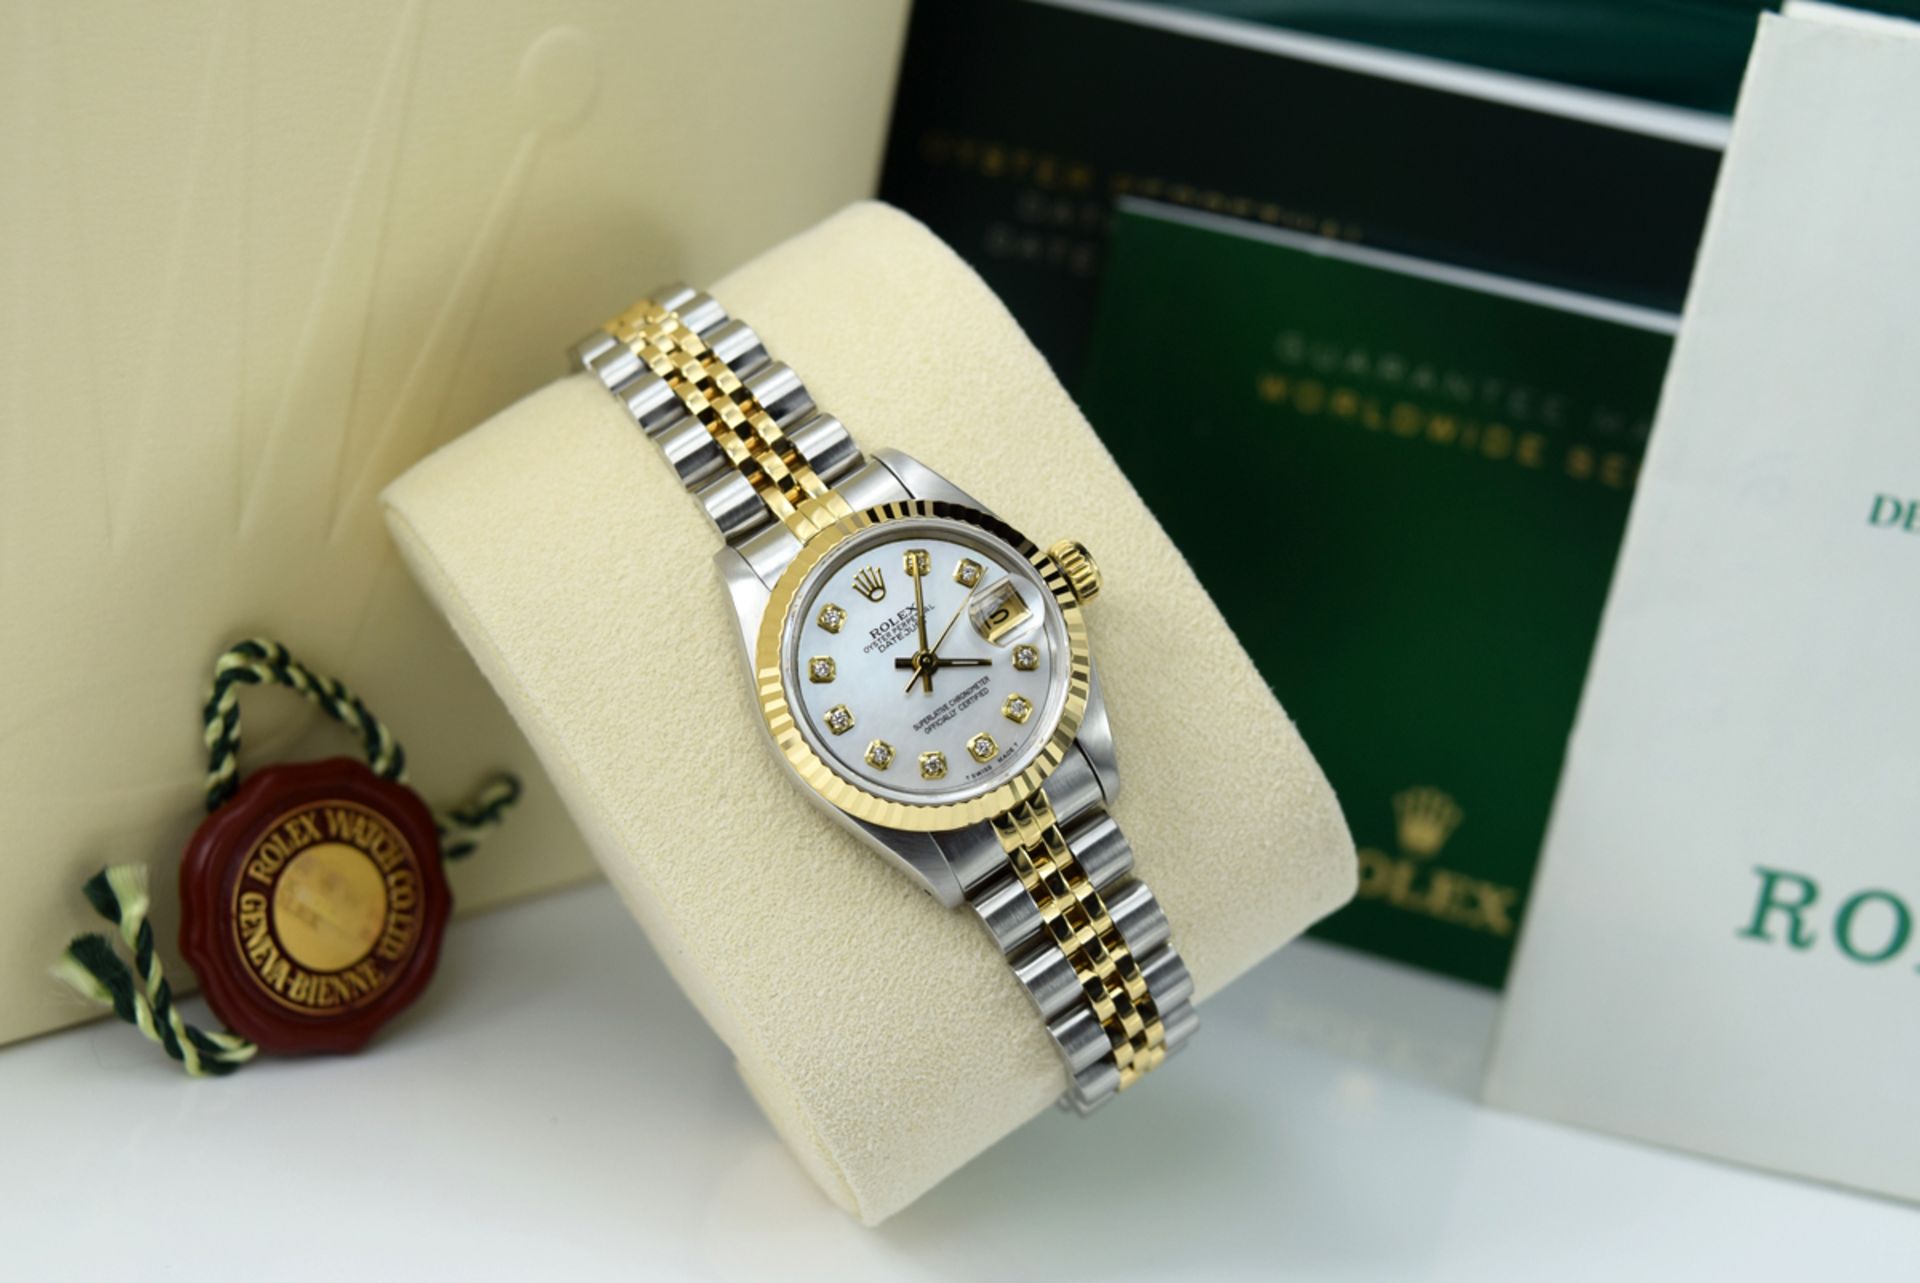 ROLEX *DIAMOND* LADY DATEJUST - 18K GOLD & STEEL with WHITE MOP DIAMOND DIAL - Image 14 of 15